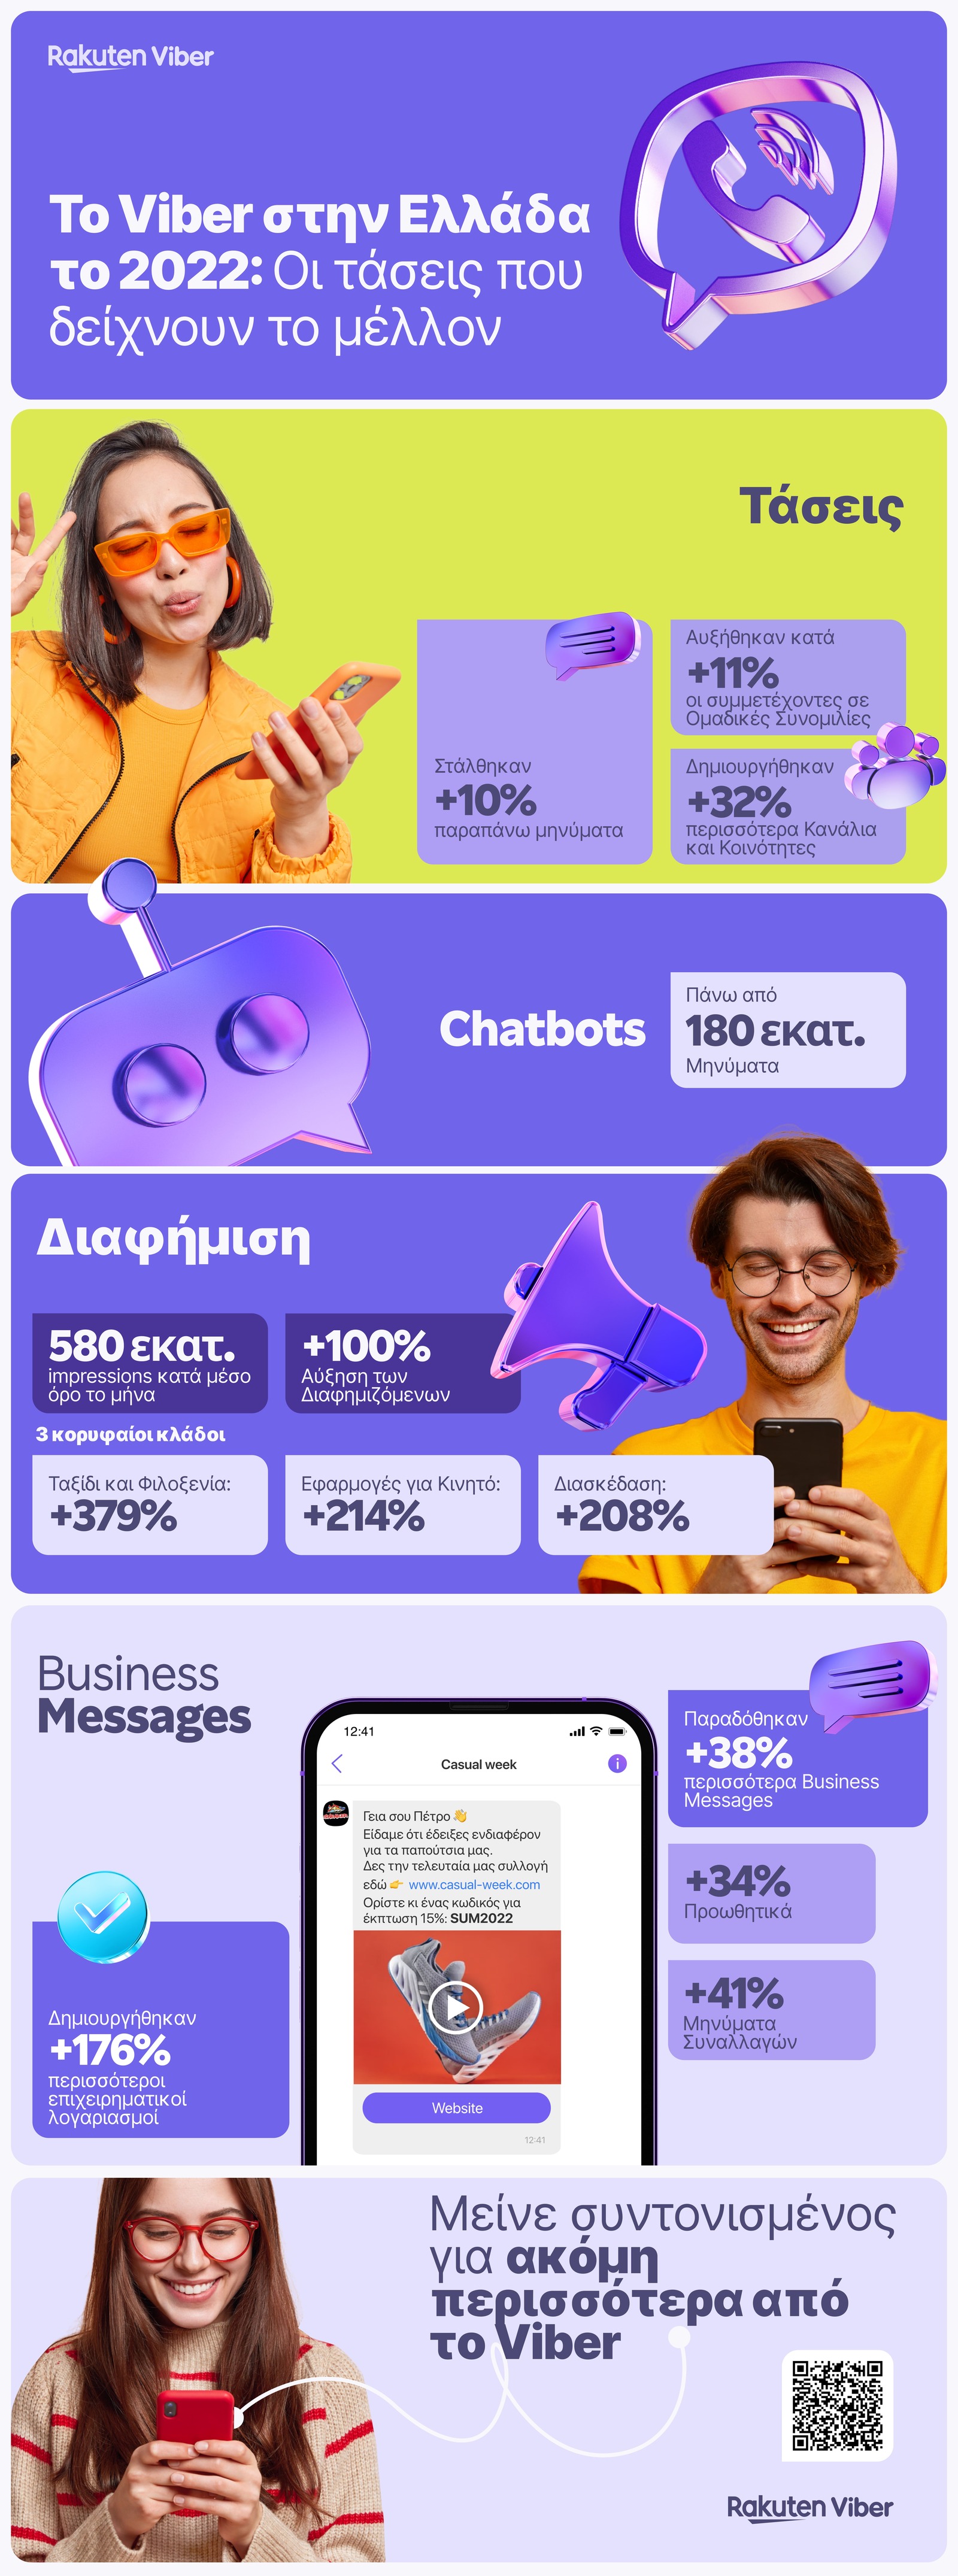 Viber in Greece 2022 Trends defining the future